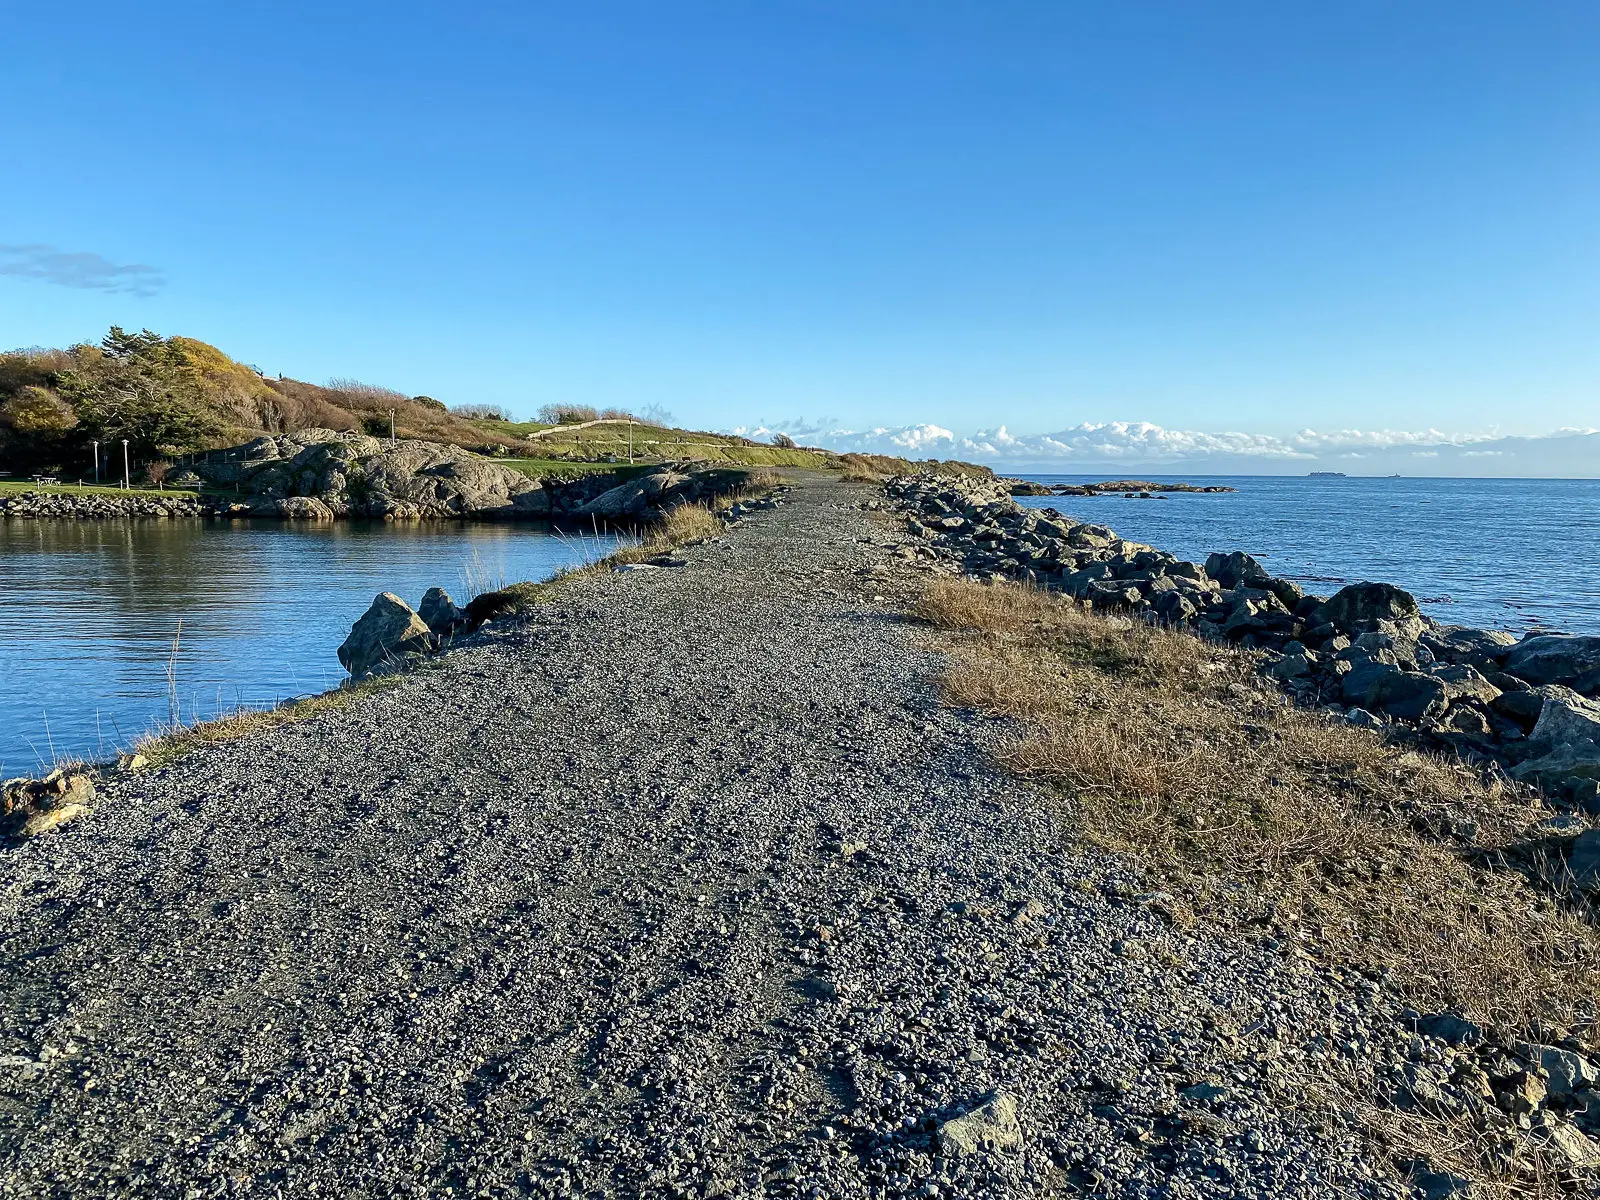 The path along the breakwater at Macaulay Point Park